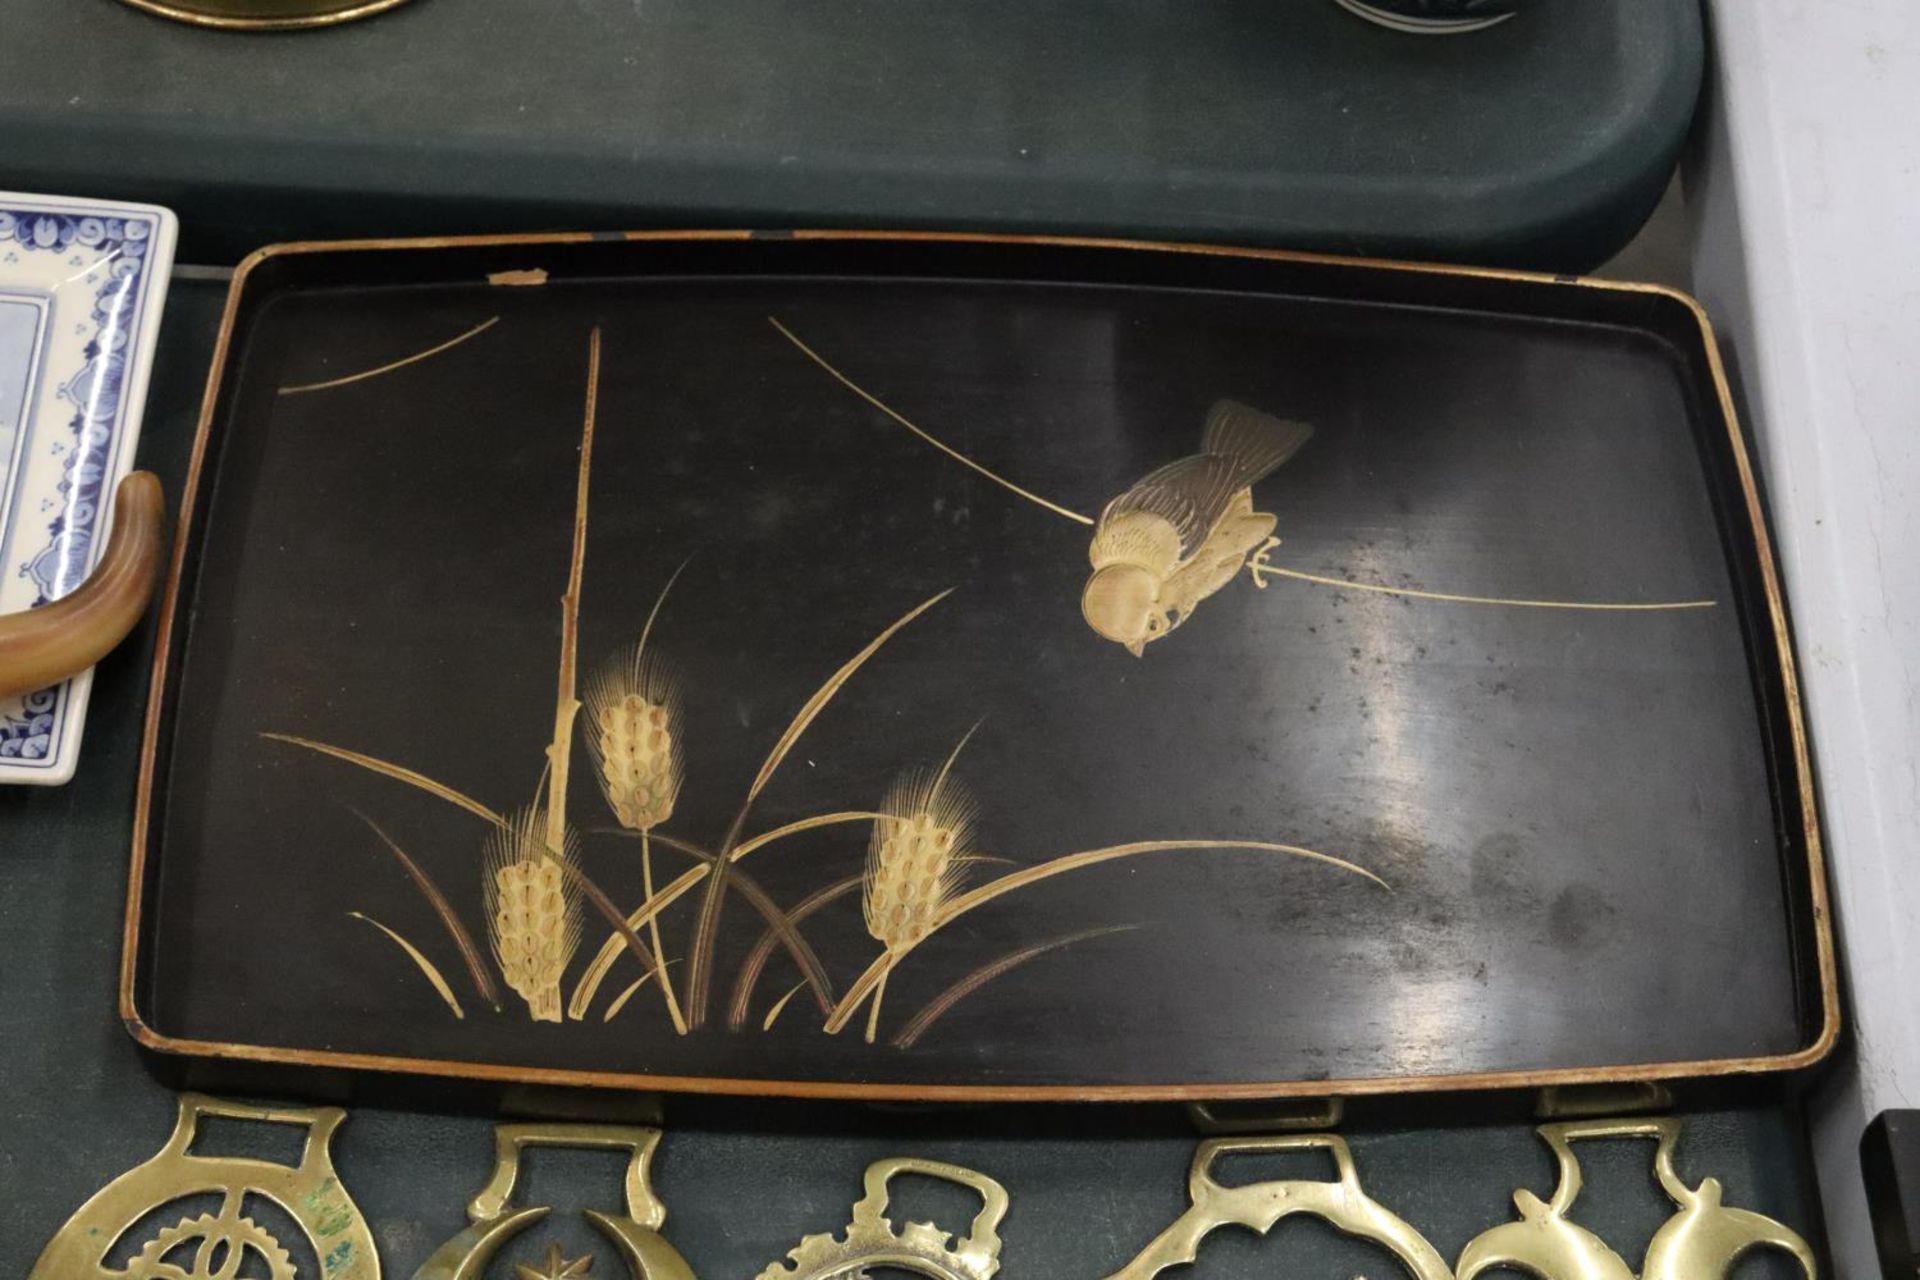 A BLACK LACQUER TRAY WITH BIRD DESIGN TOGETHER WITH VINTAGE BRASSWARE AND POSTCARDS - Image 9 of 10